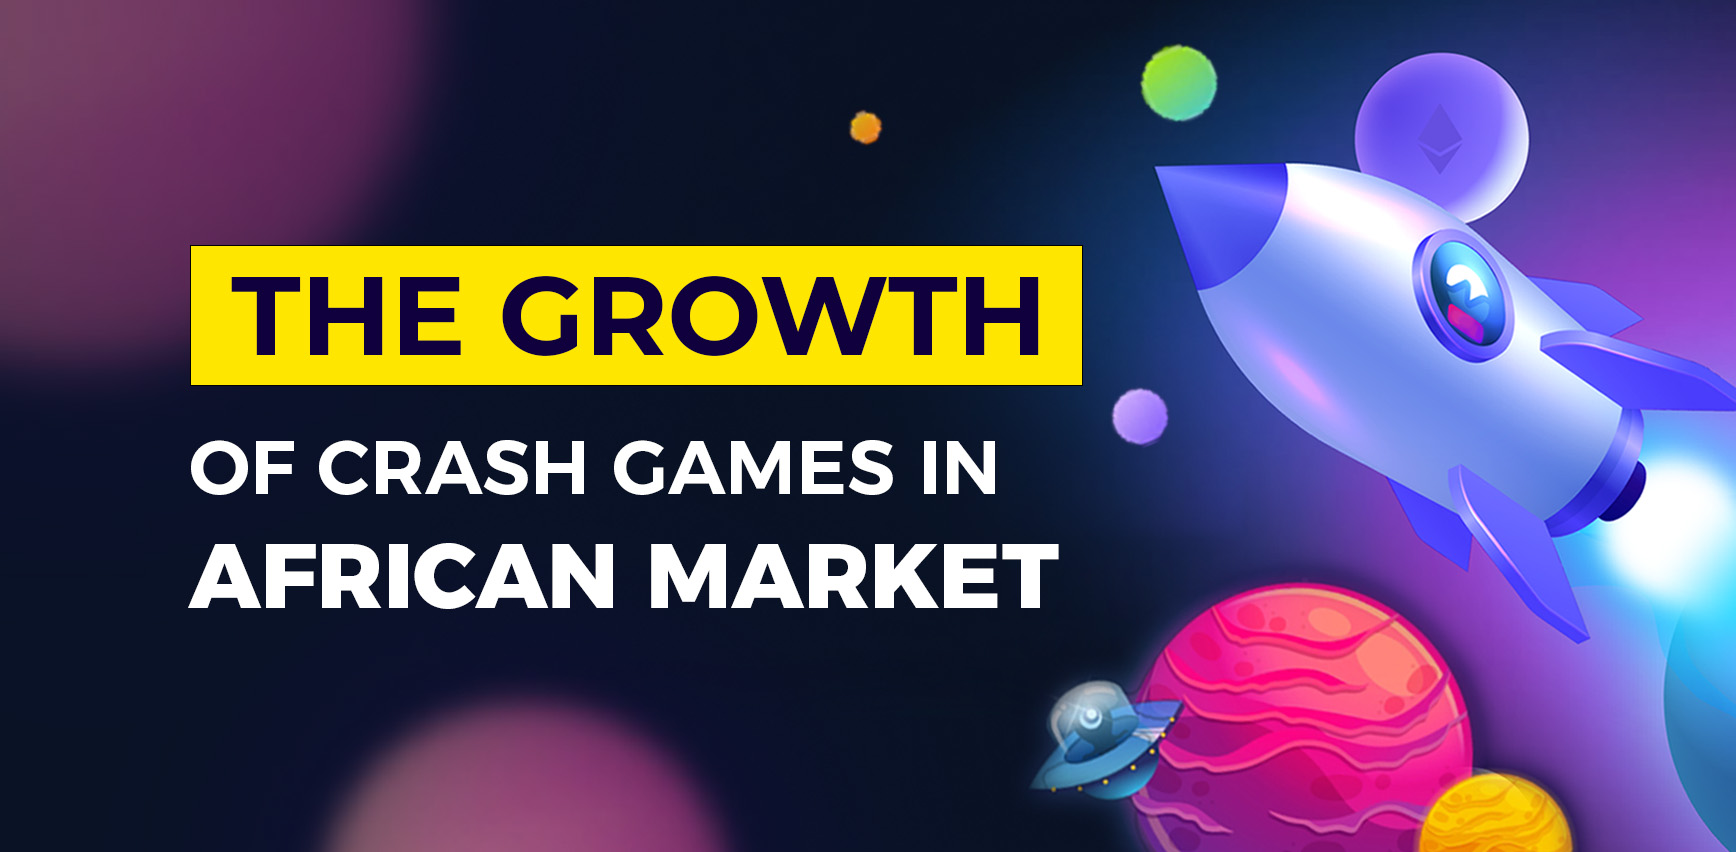 The growth of CRASH GAMES in AFRICAN MARKET